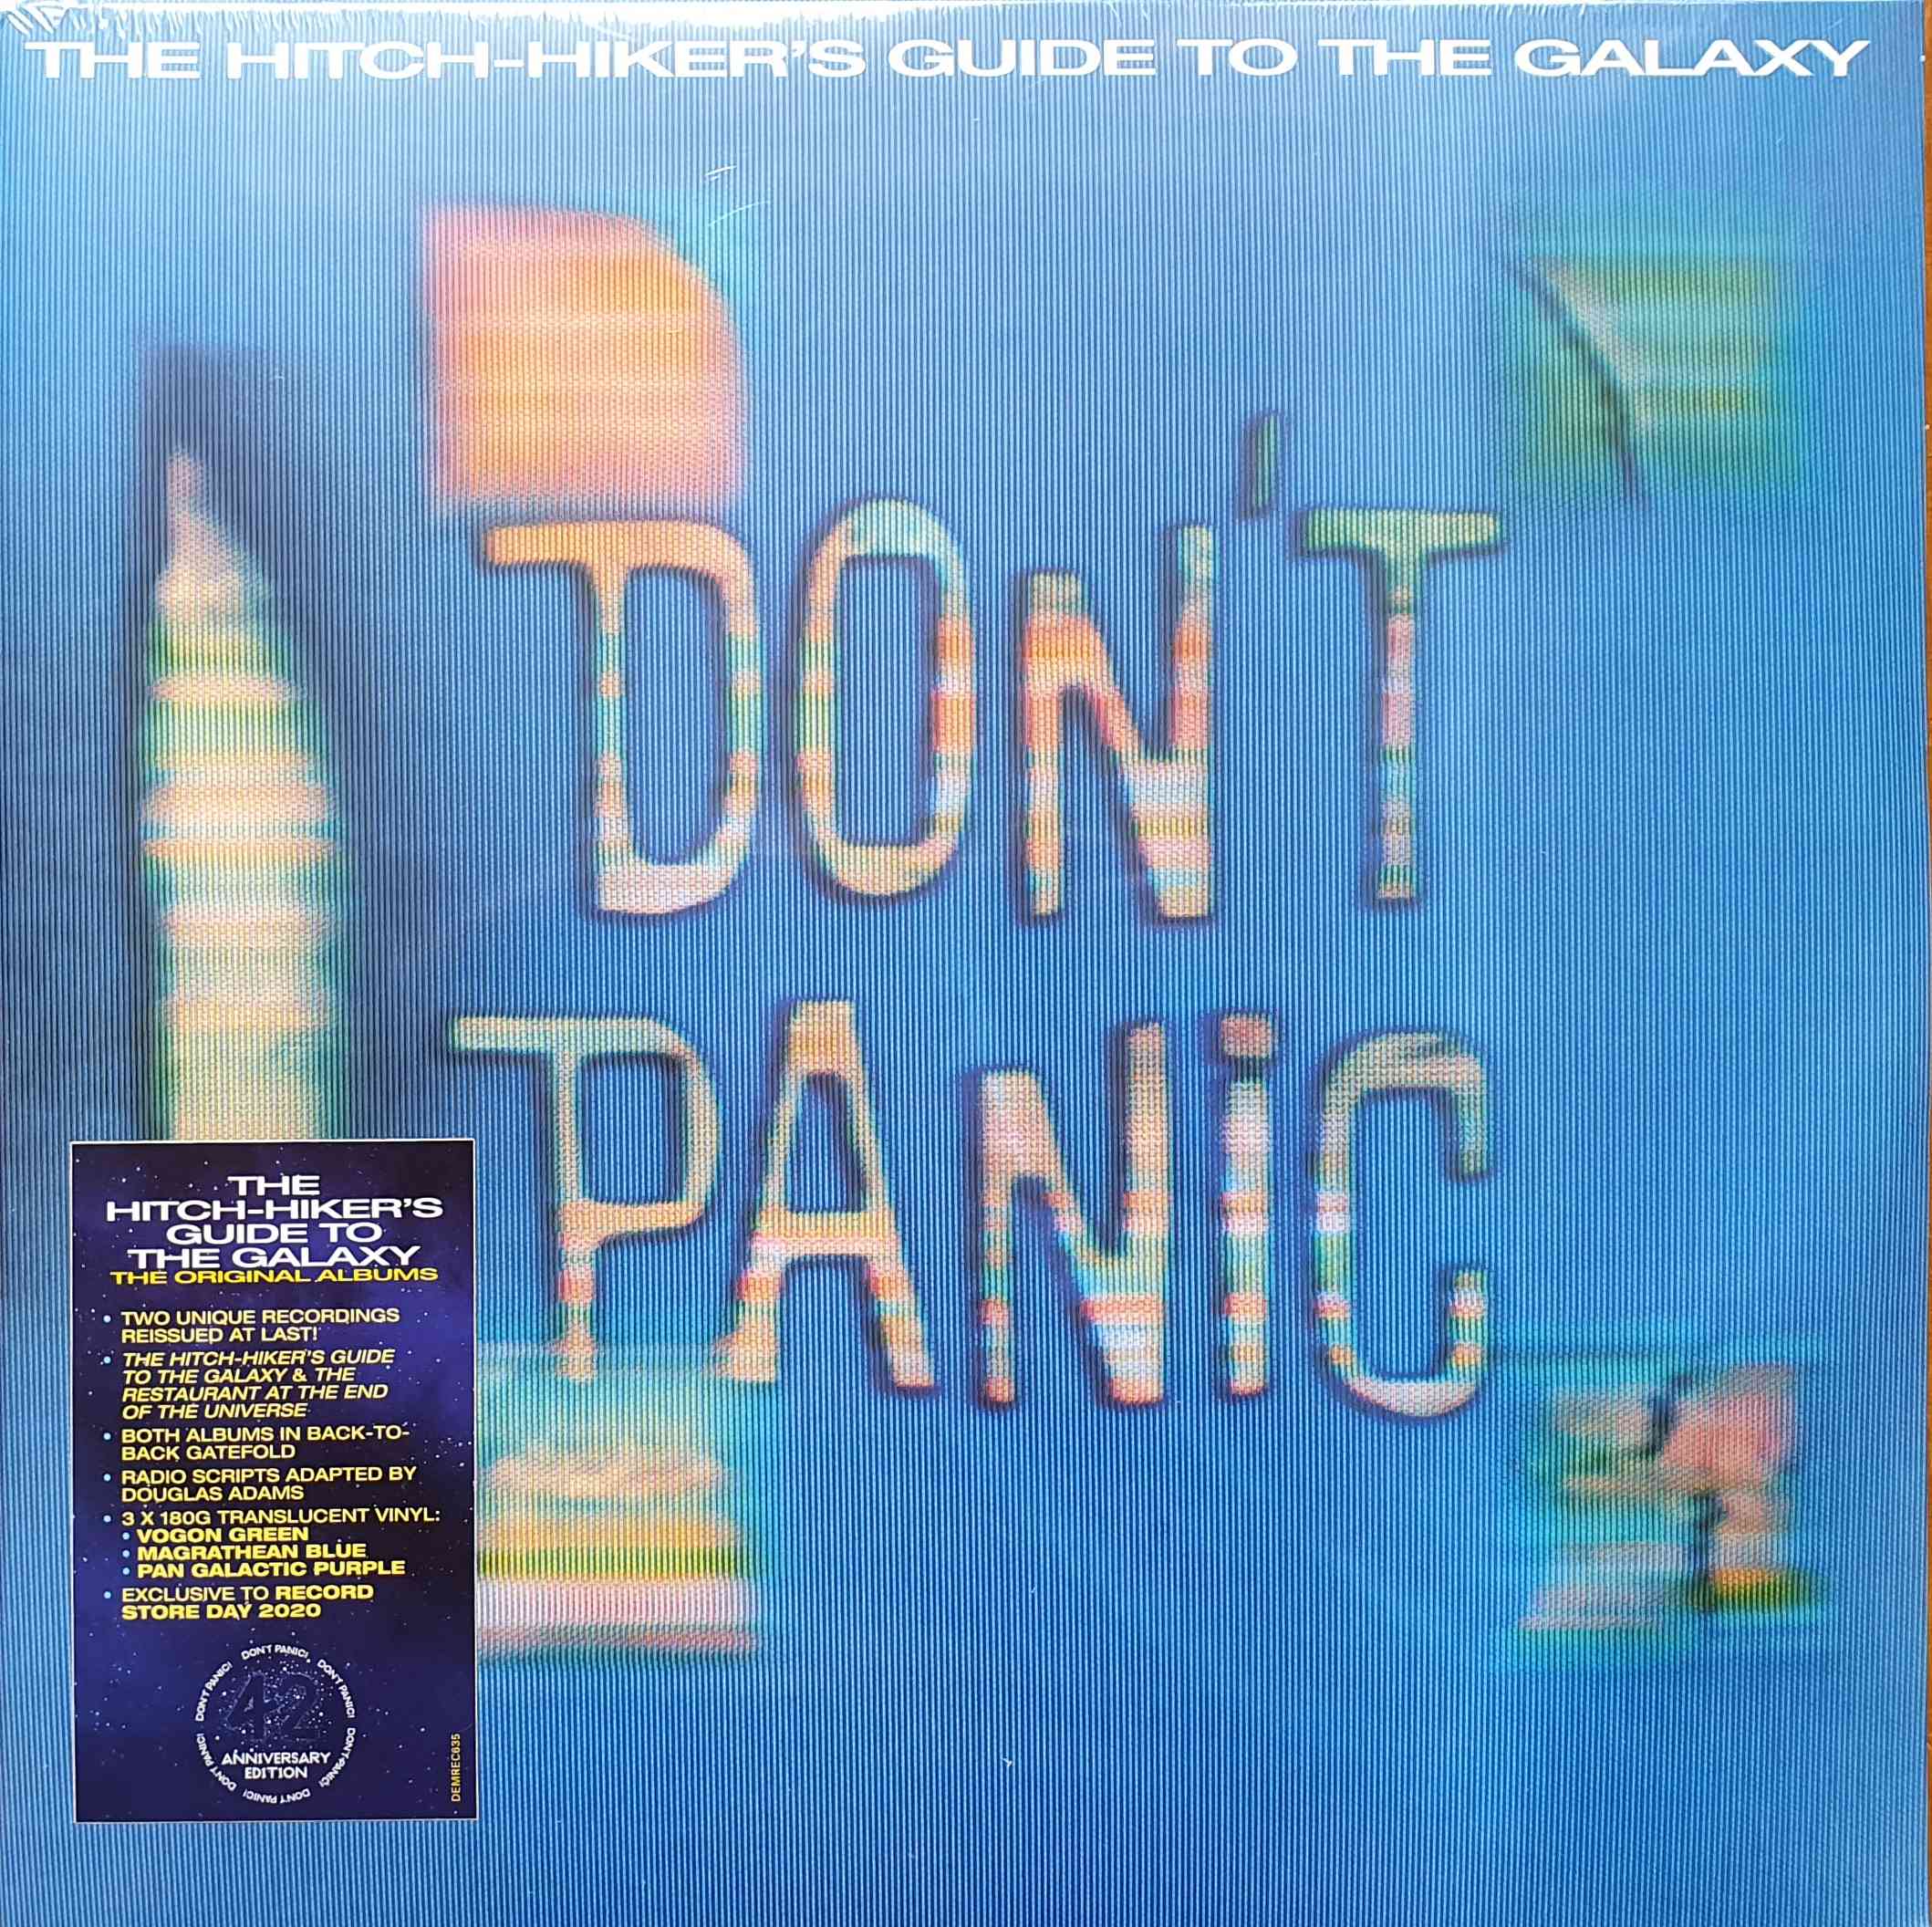 Picture of The hitchhiker's guide to the galaxy / The restaurant at the end of the universe - Record Store Day 2020 by artist Douglas Adams from the BBC albums - Records and Tapes library